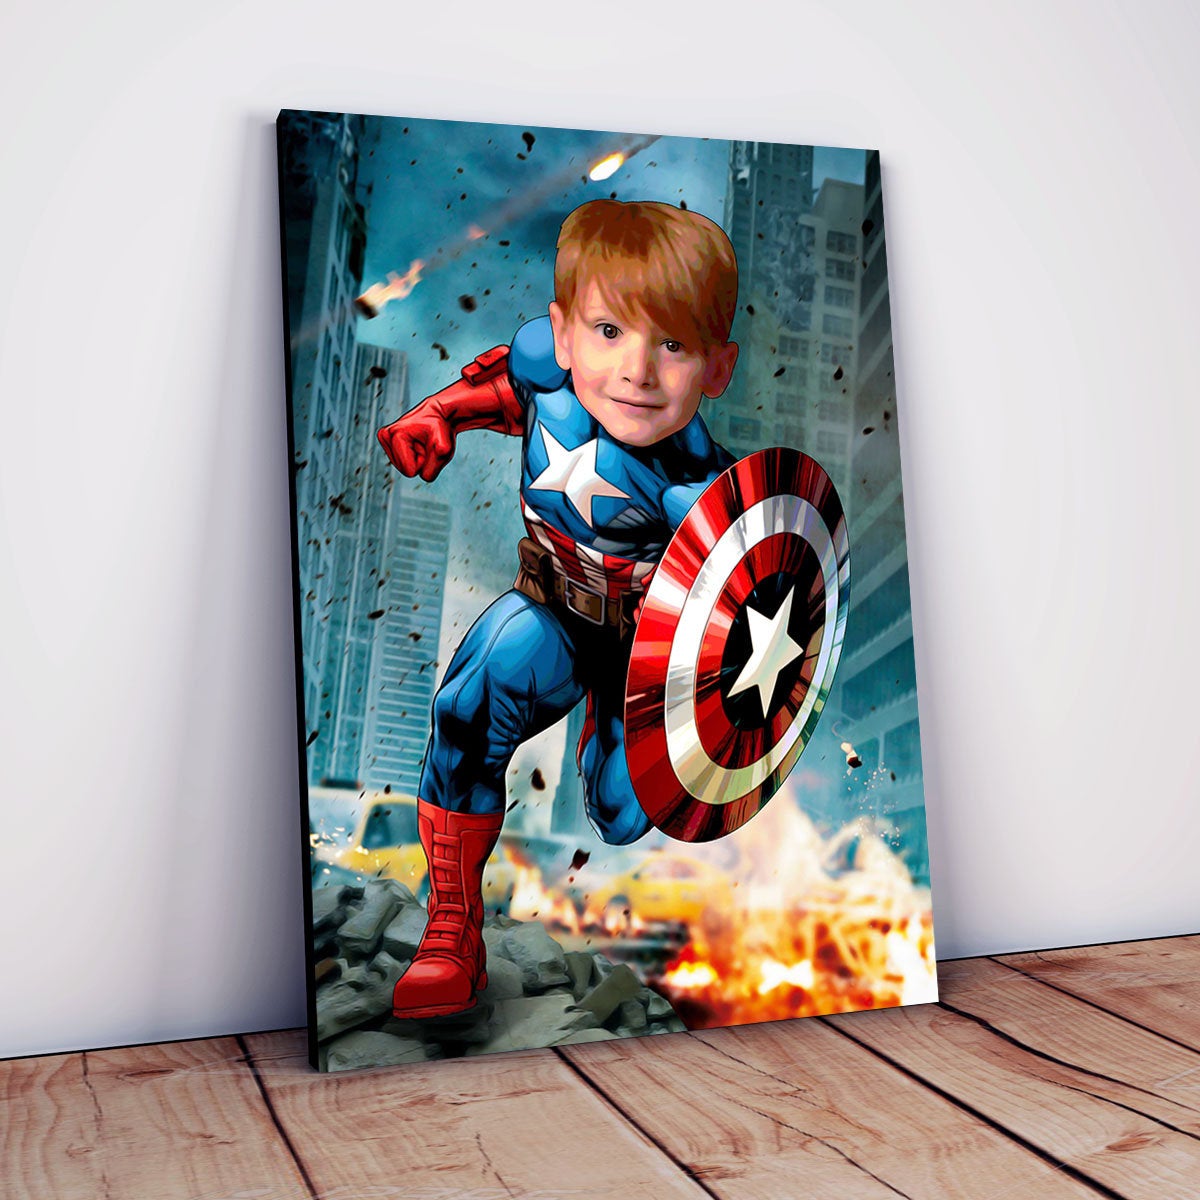 Get ready for adventure with our Captain America costume - designed to inspire bravery and courage!